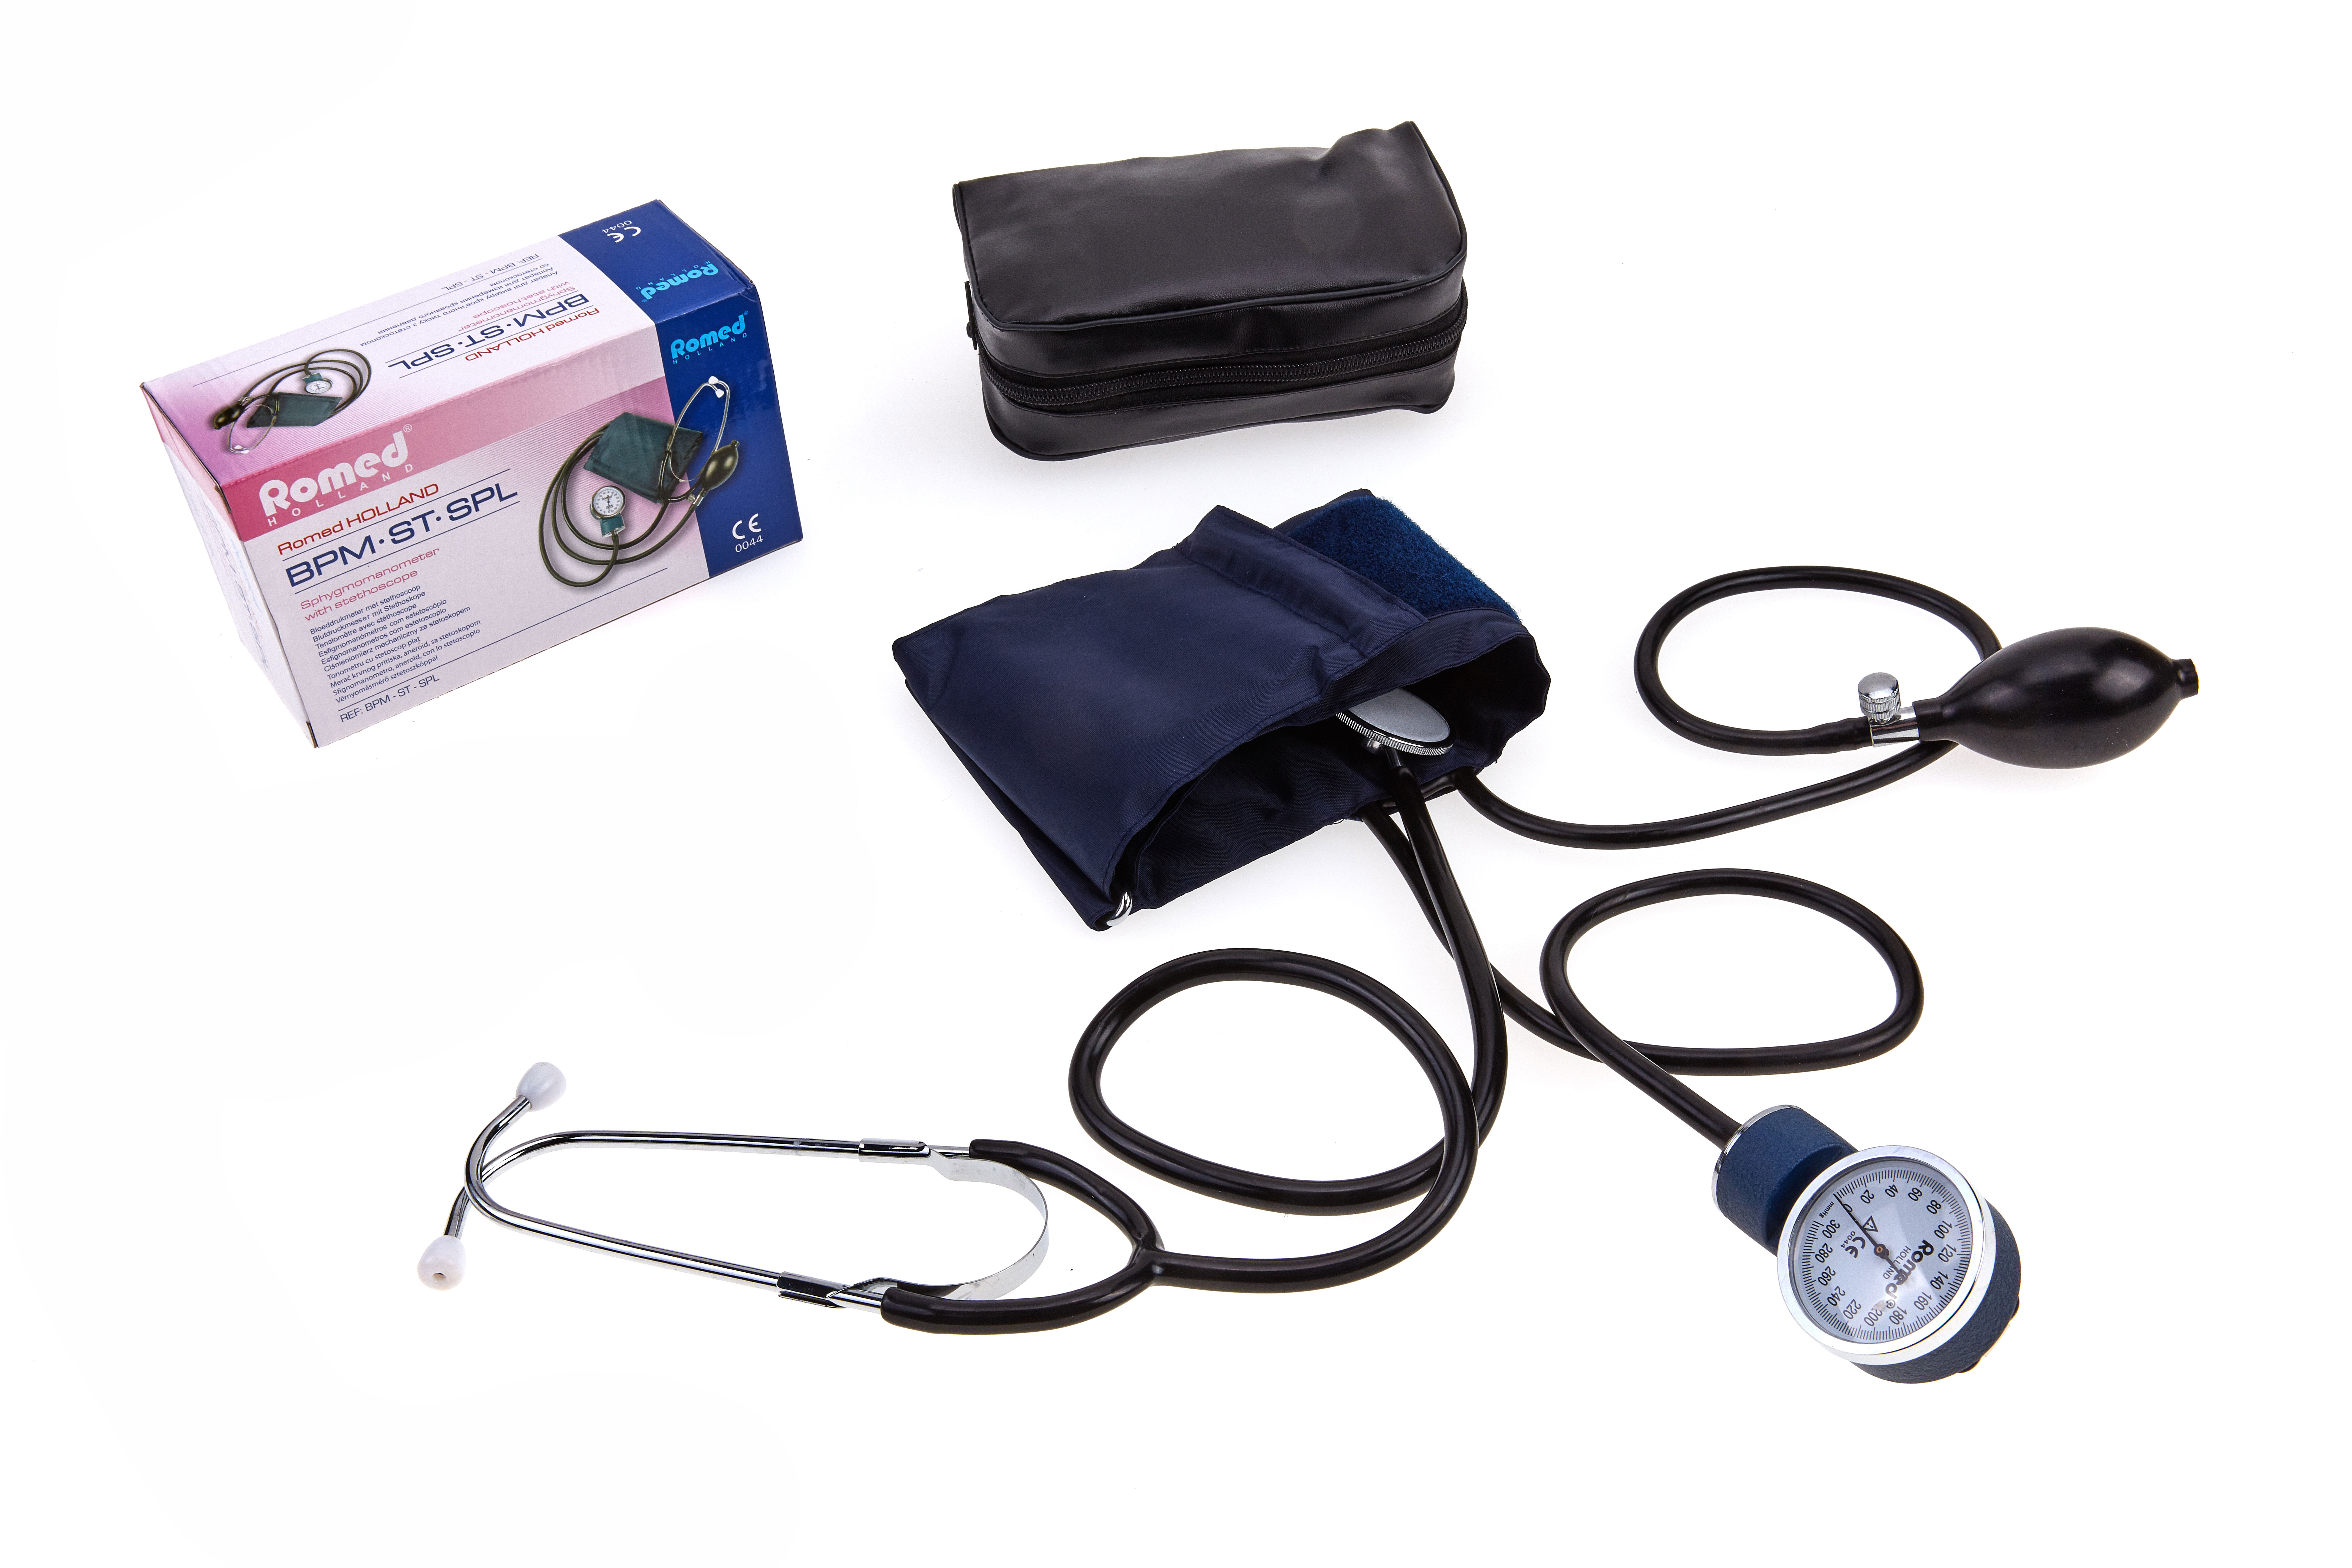 BPM-ST-SPL Romed sphygmomanometers, aneroid, with stethoscope flat chest piece, per piece in an inner box, 20 pcs in a carton.